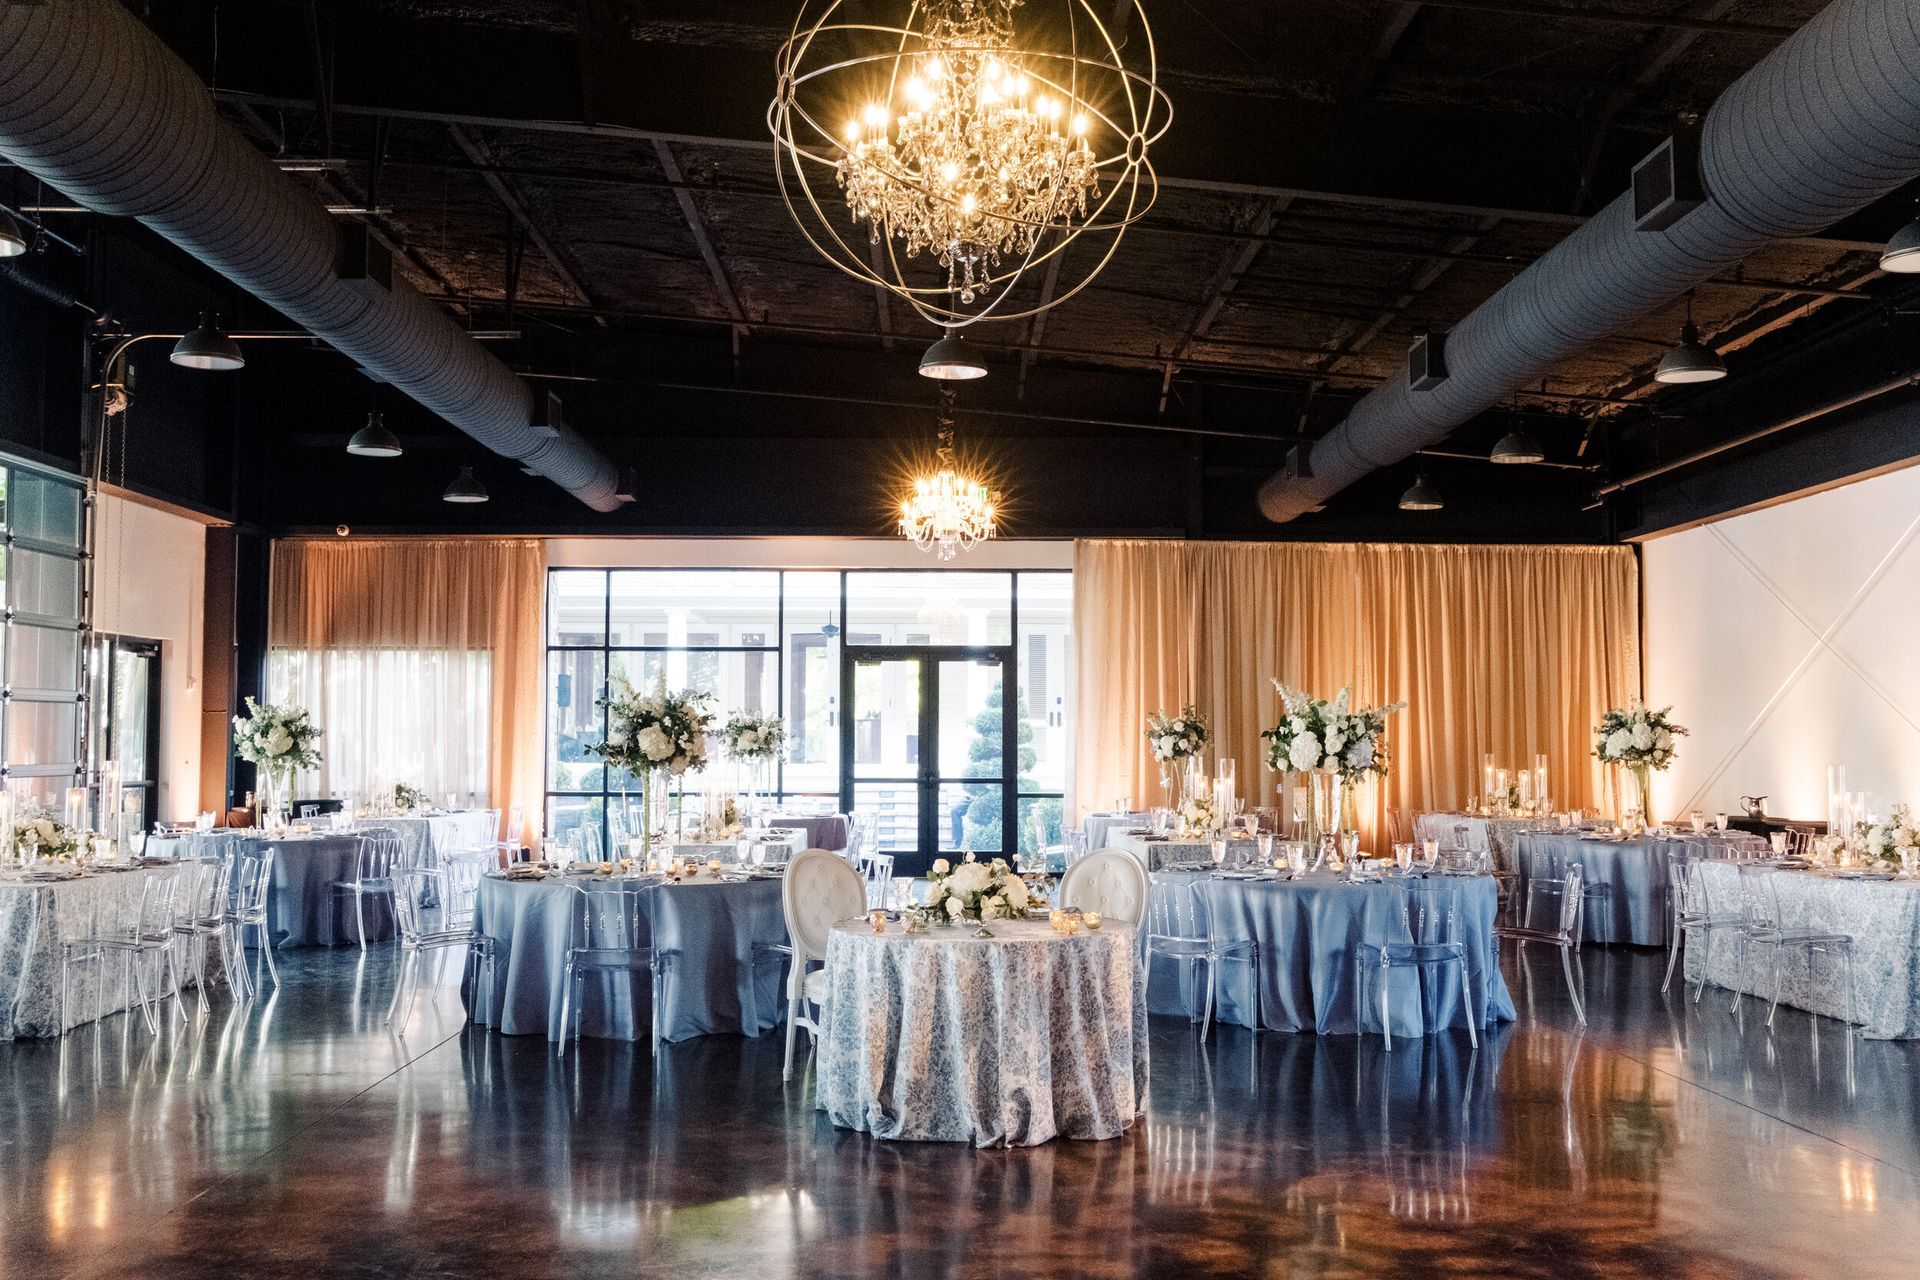 Rachel and Joe’s Wedding, large room with tables and chairs set up for a wedding reception by Wedding Planner Nashville